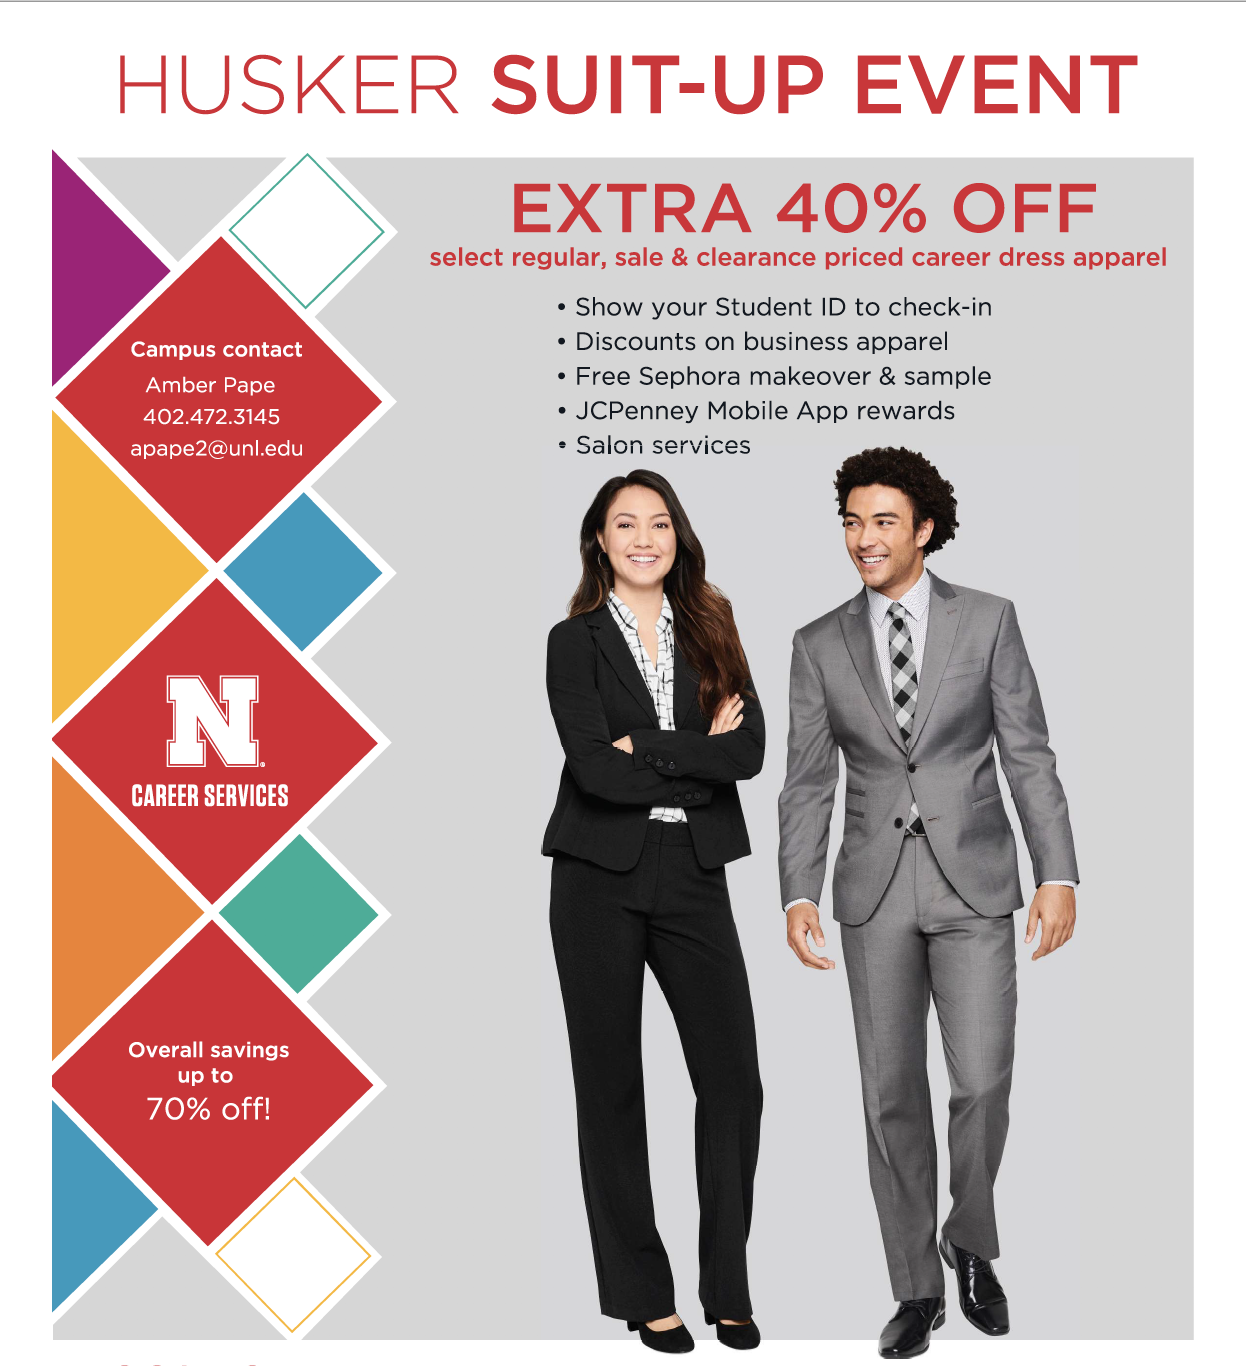 Husker Suit-Up event is Sept. 9 from 6:30-9:30 p.m. at JC Penney in Gateway Mall.